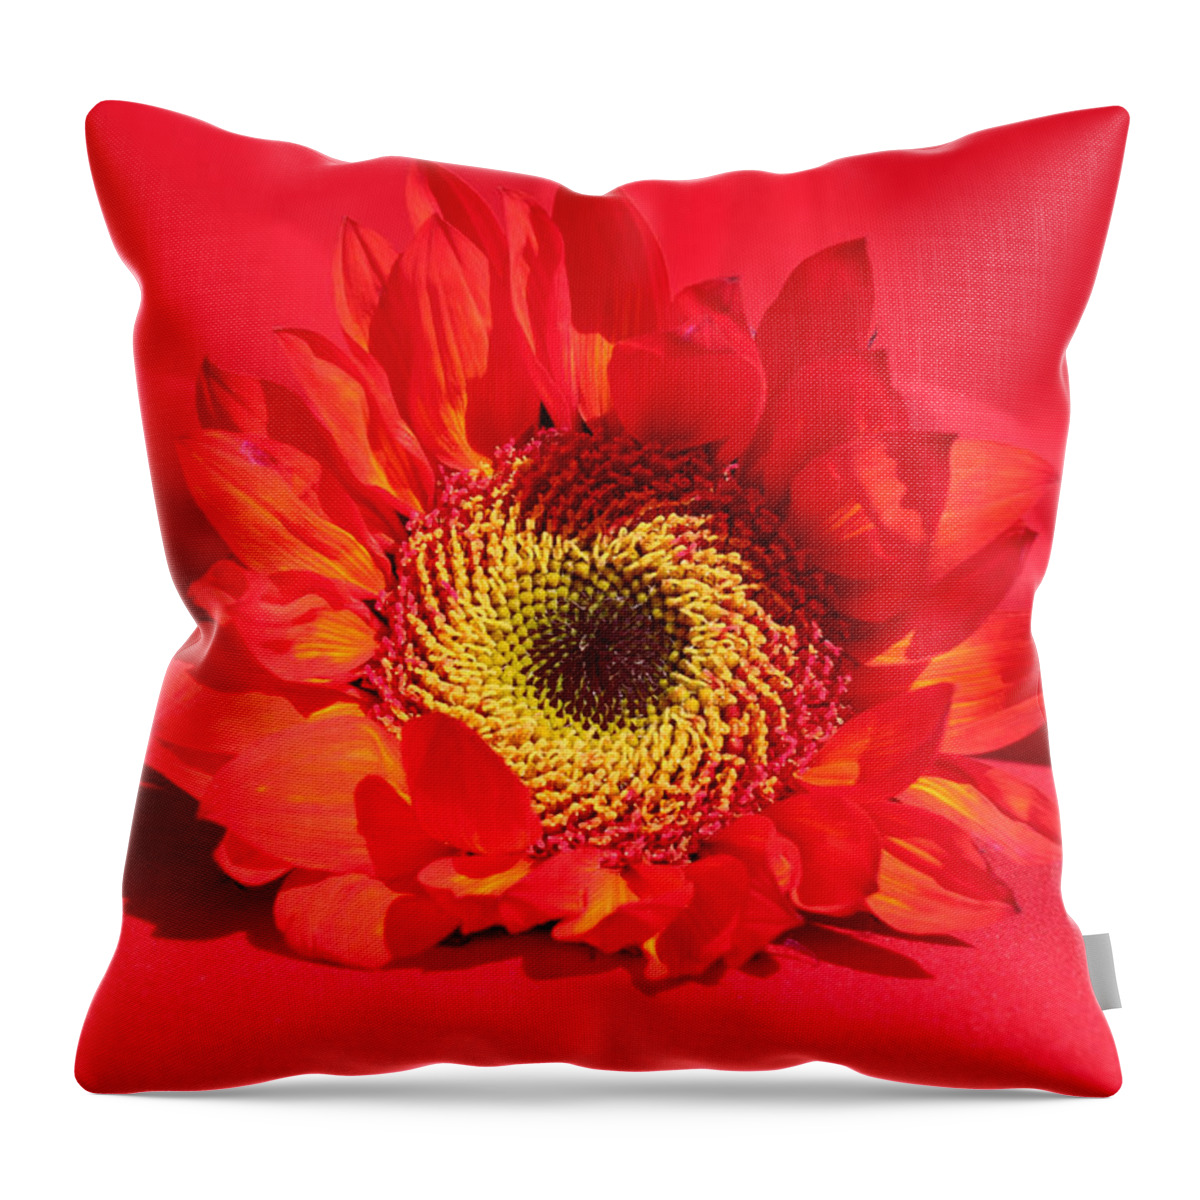 Happy Sunflower Throw Pillow featuring the photograph Happy Sunflower by Kume Bryant